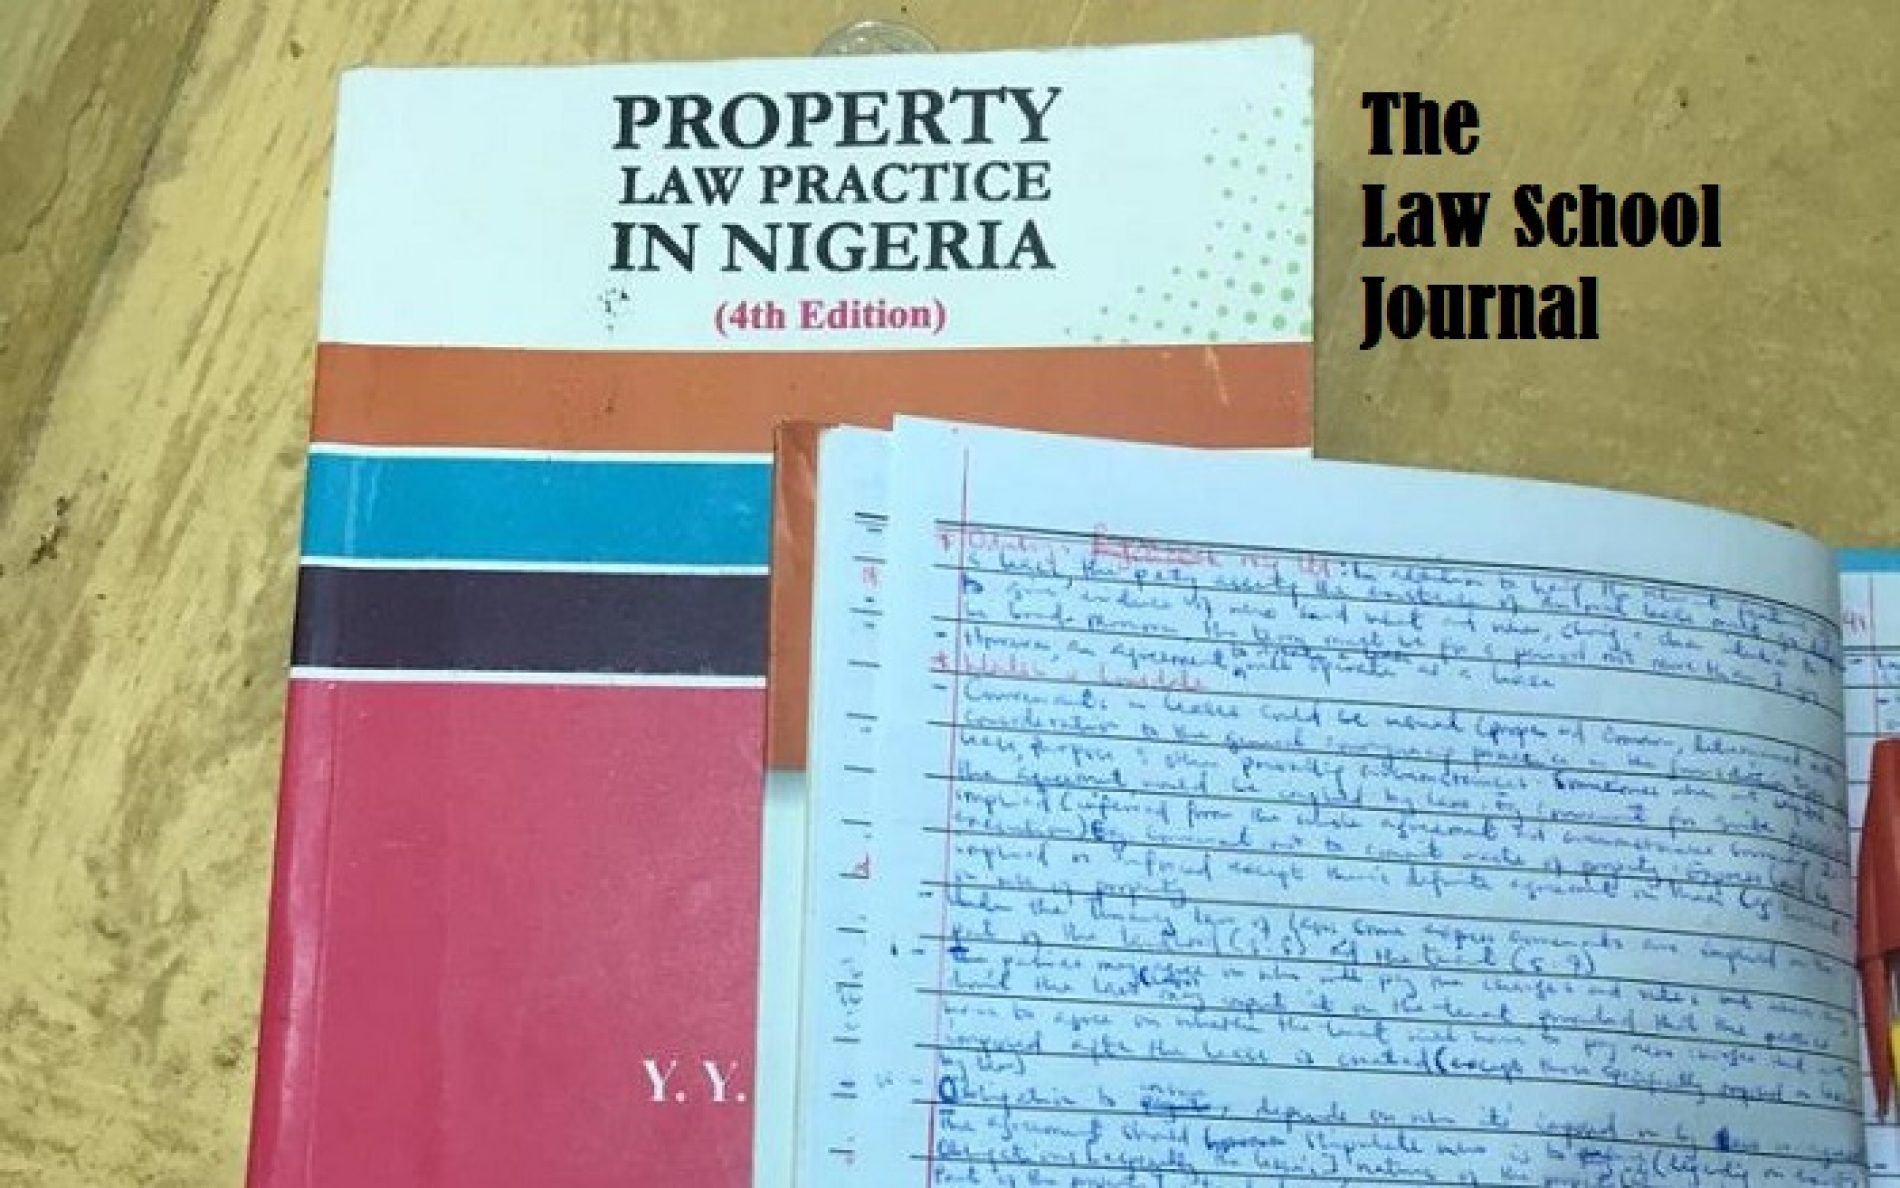 The Law School Journal (Entry 4)